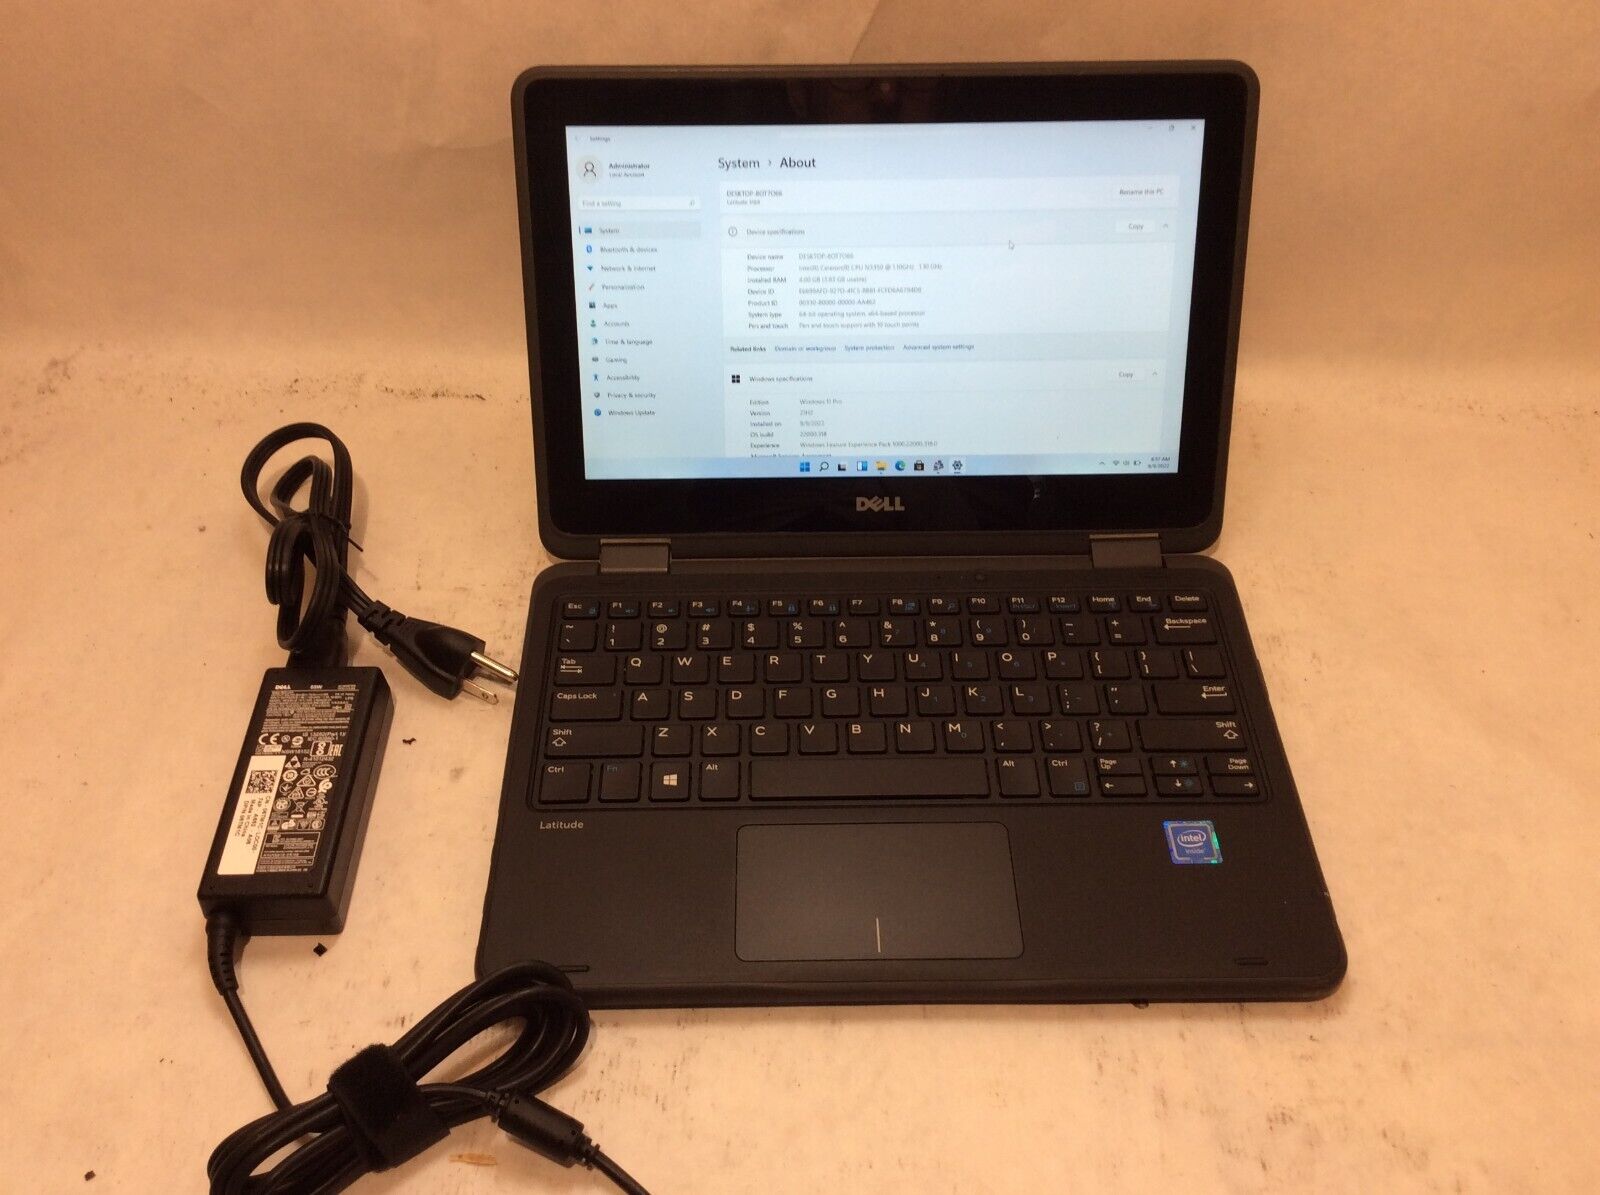 Dell Latitude 3189 Windows 11 Laptop 2-in-1 tablet 64GB SSD - 4GB   Touch 884116299172 | eBay